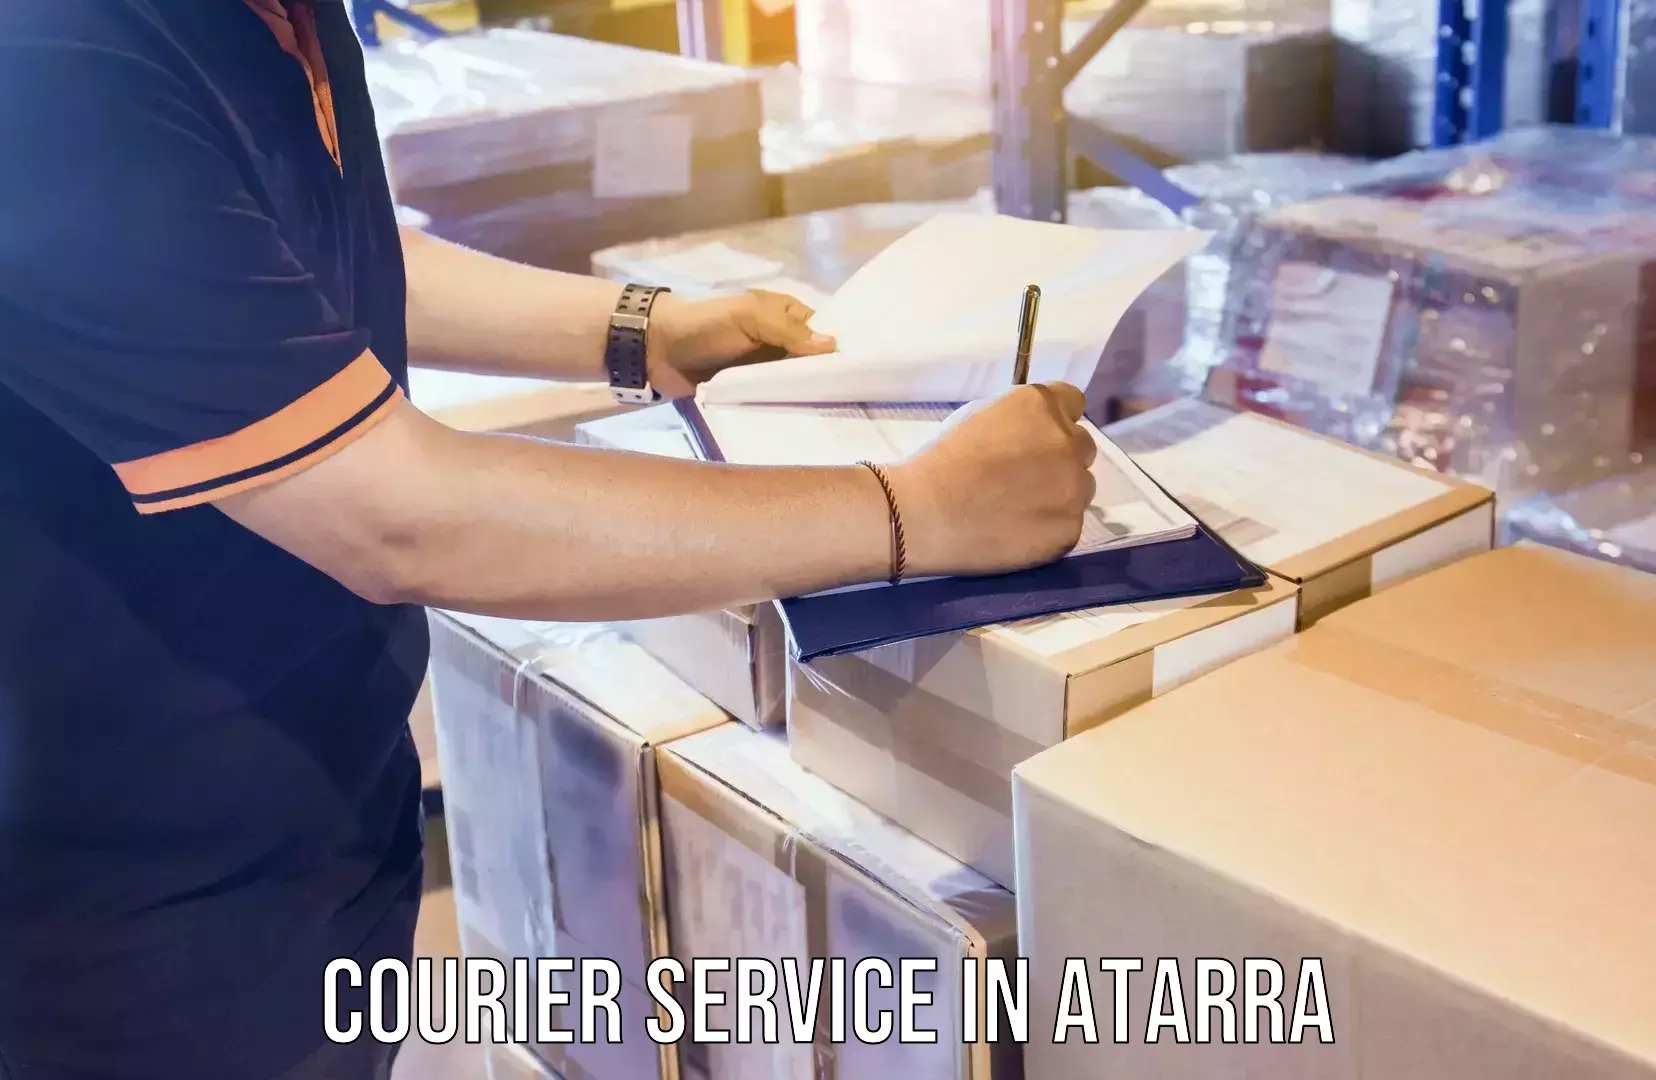 Business courier solutions in Atarra